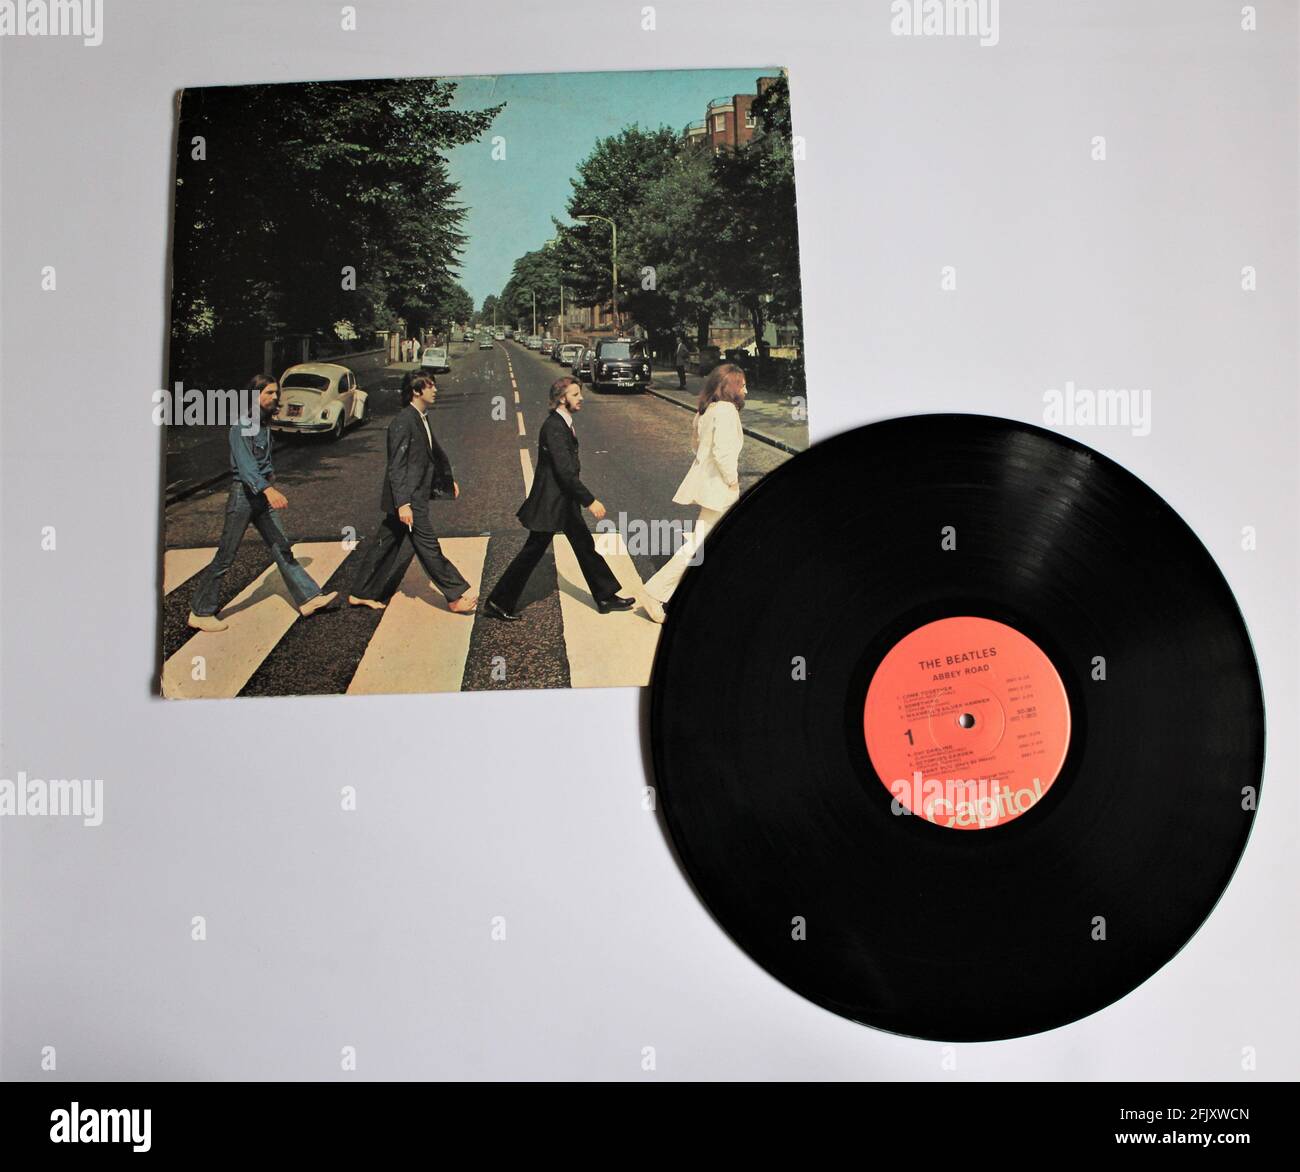 Abbey Road is a record by the English rock band The Beatles. This music album is on a vinyl record LP disc. Psychedelic pop music. Stock Photo